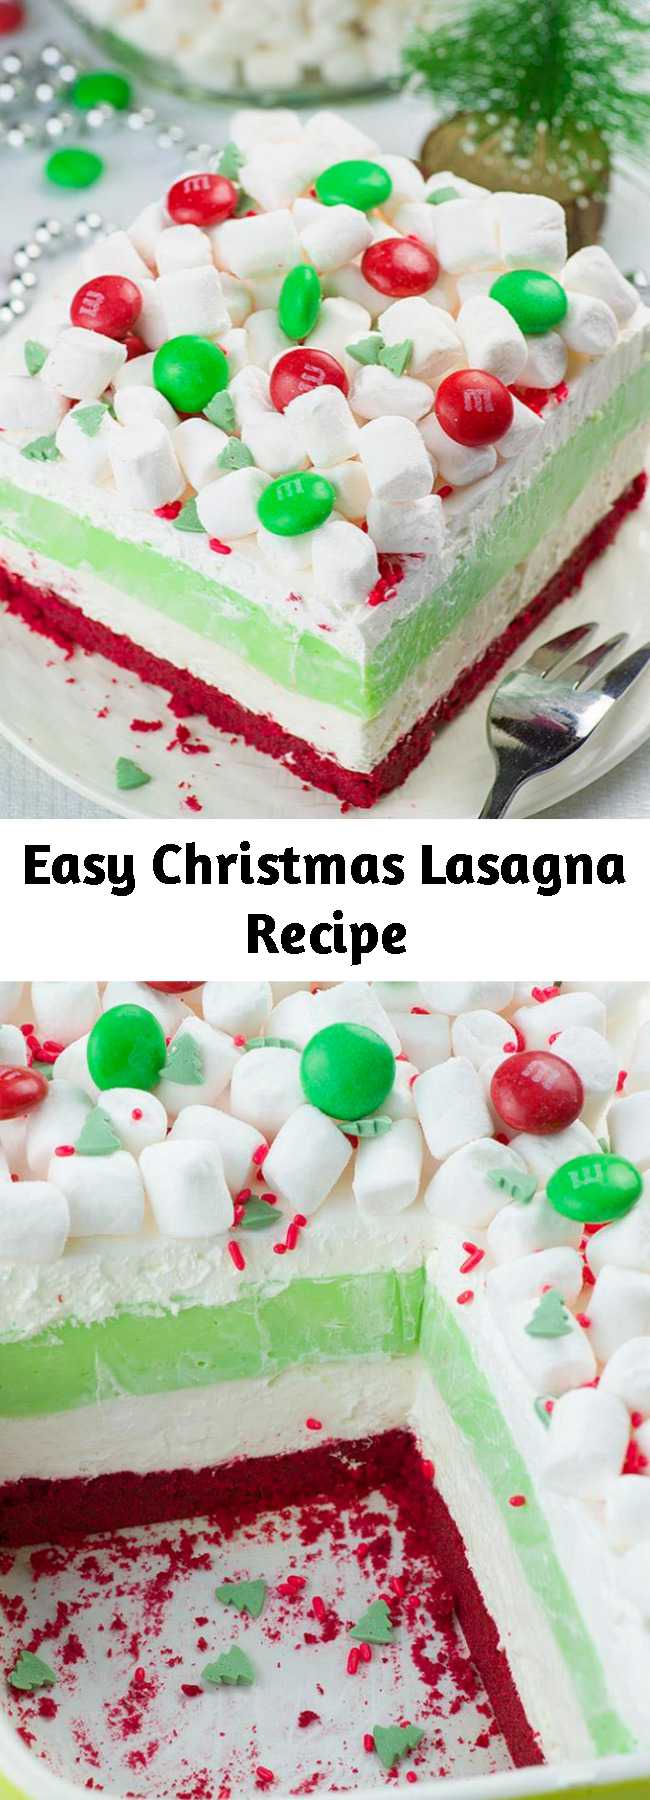 Easy Christmas Lasagna Recipe - Christmas Lasagna is a whimsical layered dessert recipe! Made with buttery, red velvet shortbread cookie crust, a peppermint cheesecake layer, white chocolate pudding, whipped cream and mini marshmallows on top. I’m sure it will be a hit at your Christmas gathering. #christmasdesserts #christmasrecipes #marshmallows